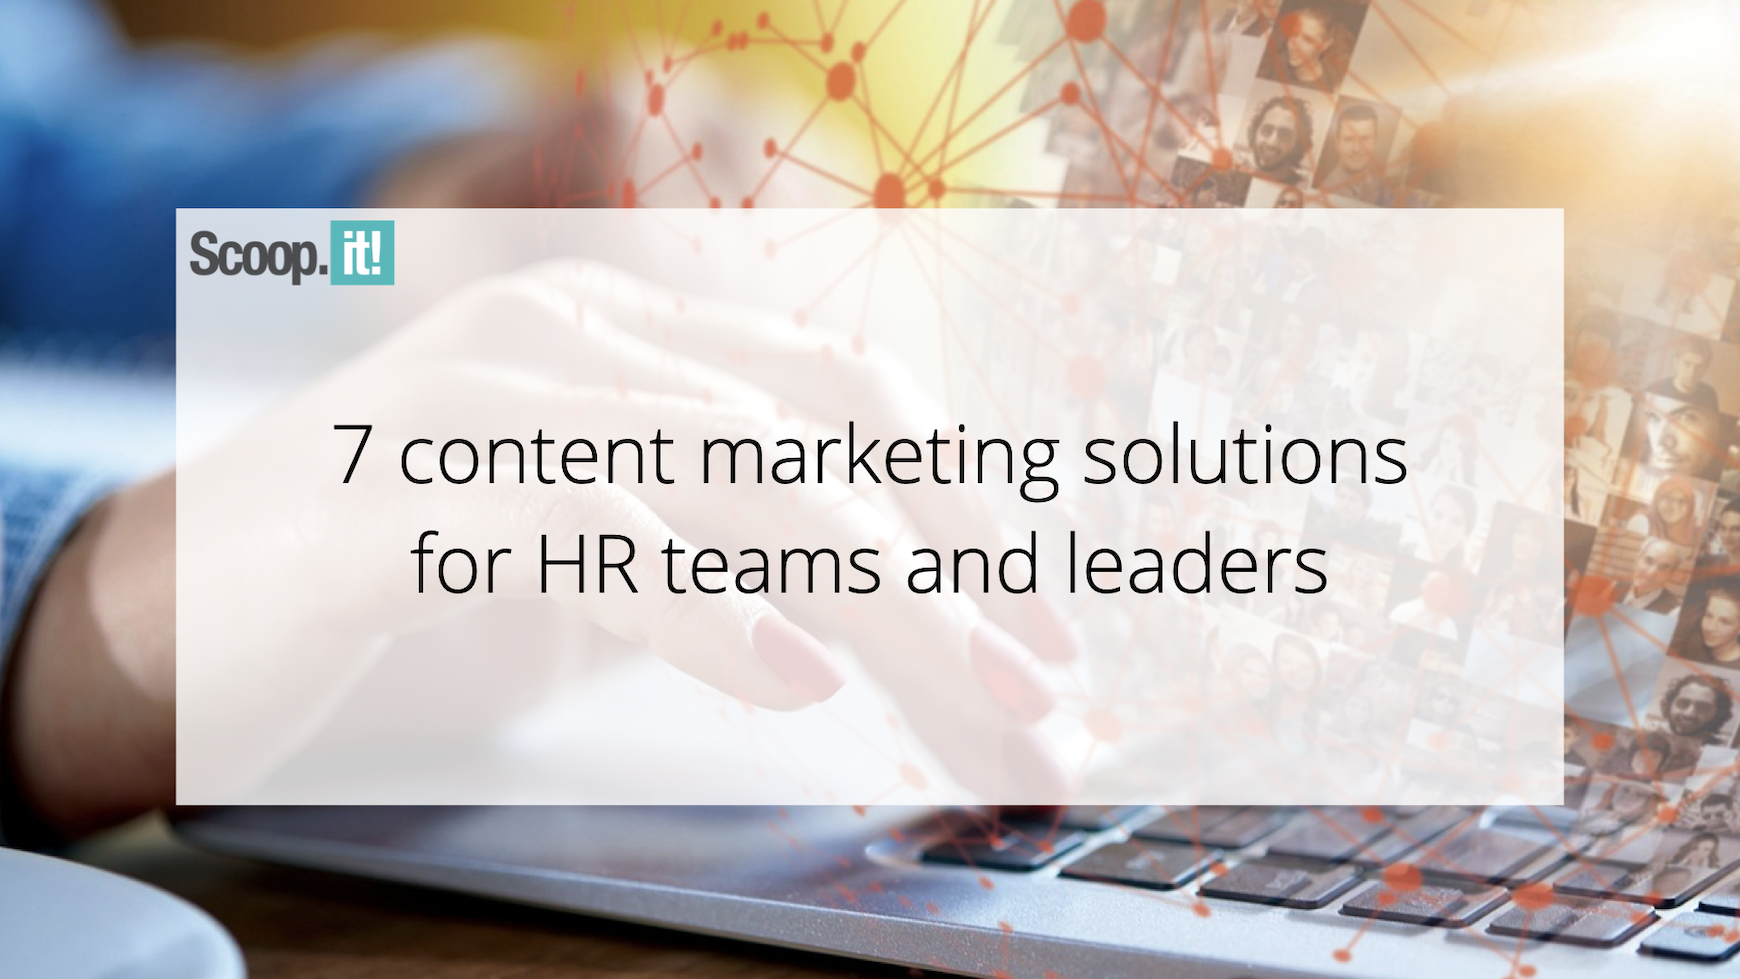 7-content-marketing-solutions-for-hr-teams-and-leaders-–-scoop.it-blog